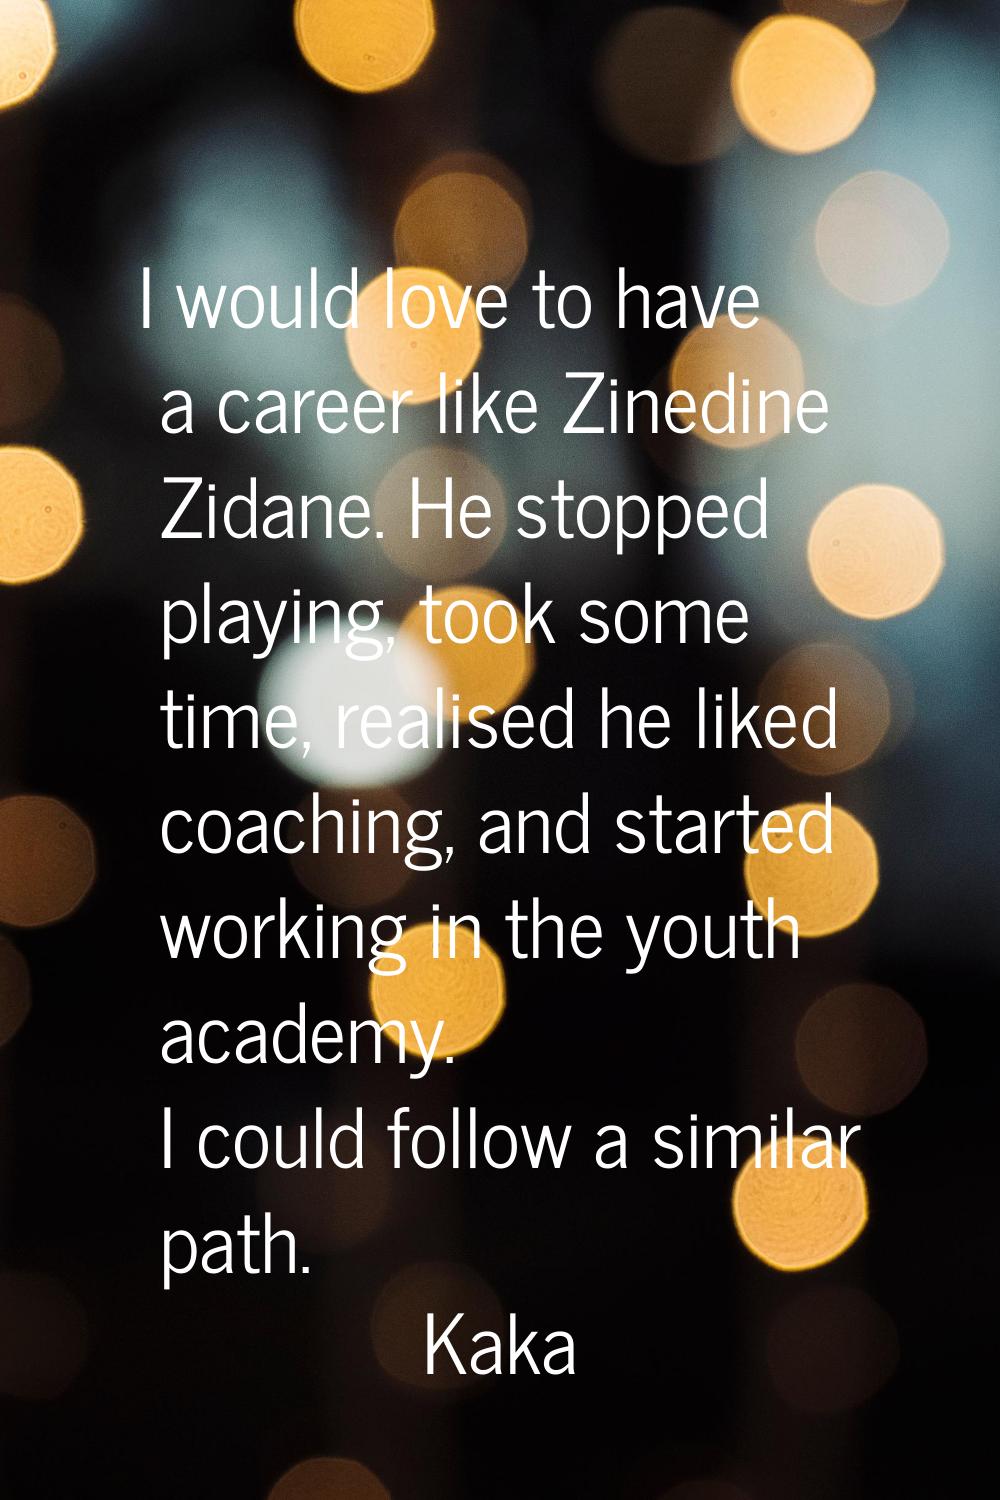 I would love to have a career like Zinedine Zidane. He stopped playing, took some time, realised he